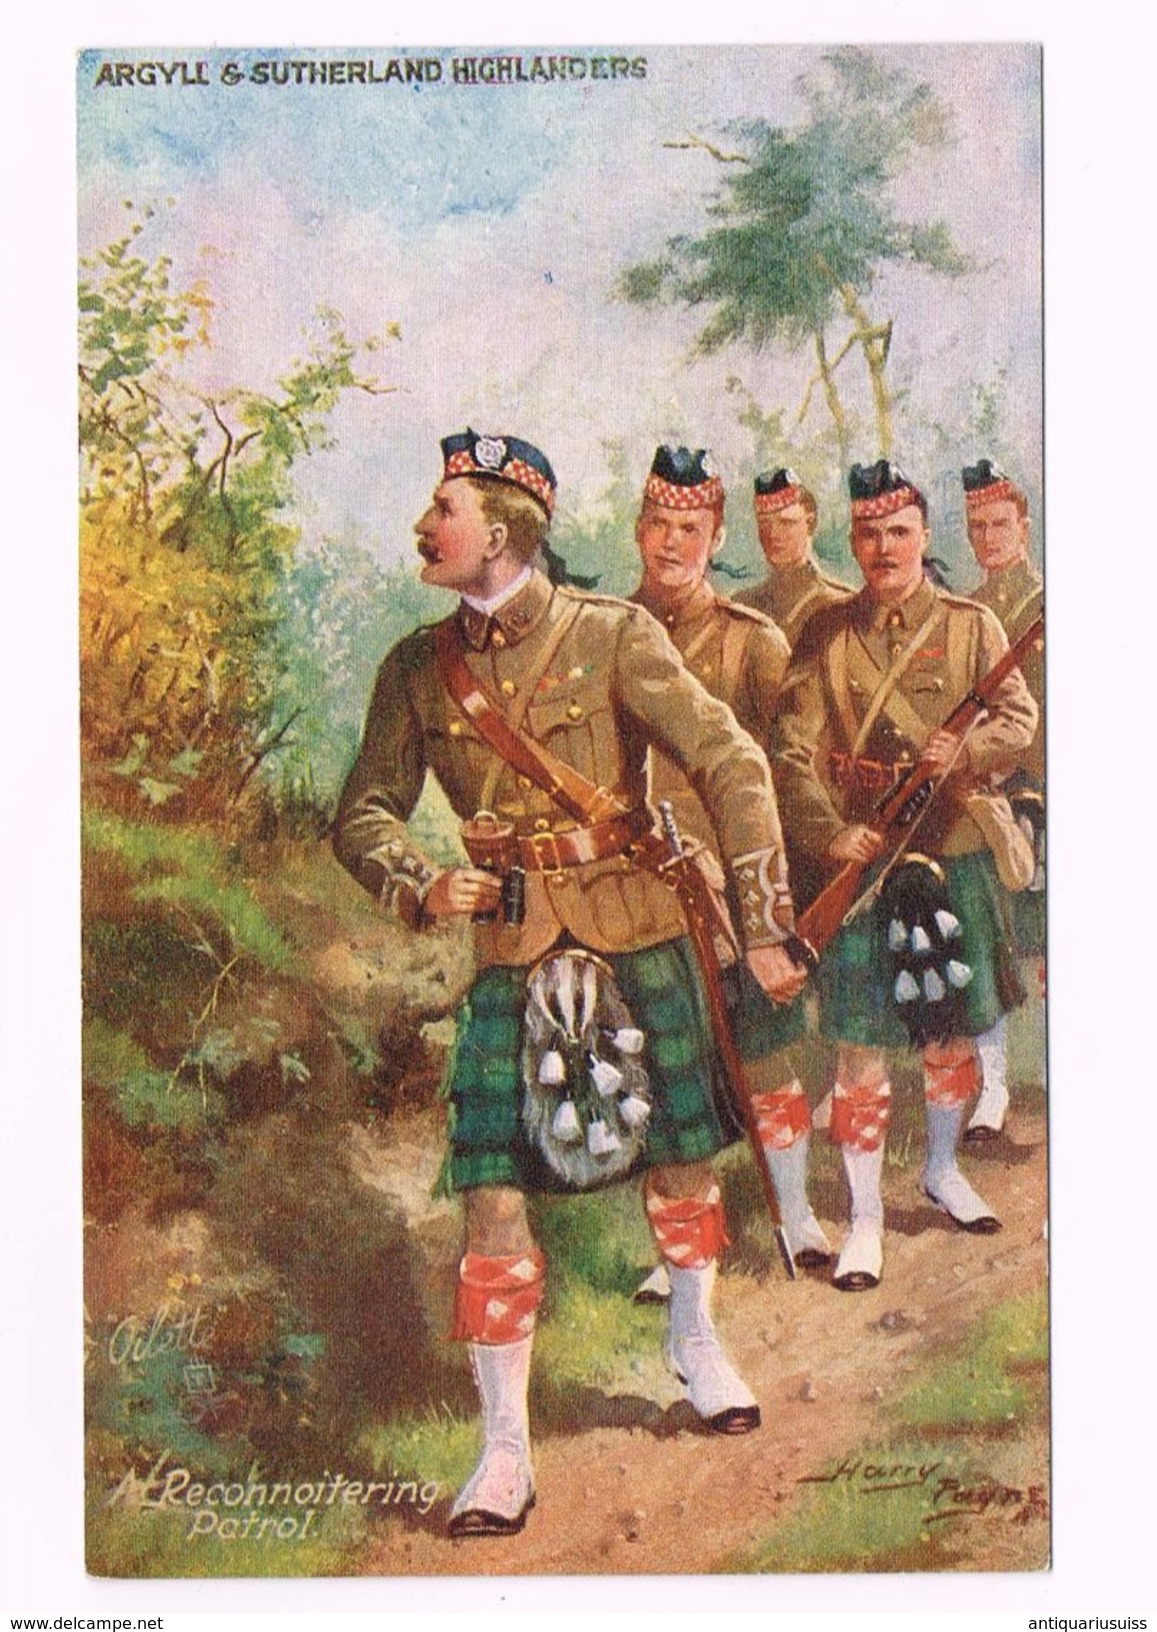 THE ARGYLL AND SUTHERLAND HIGHLANDERS - United Kingdom - Scottish Soldiers - Costumes